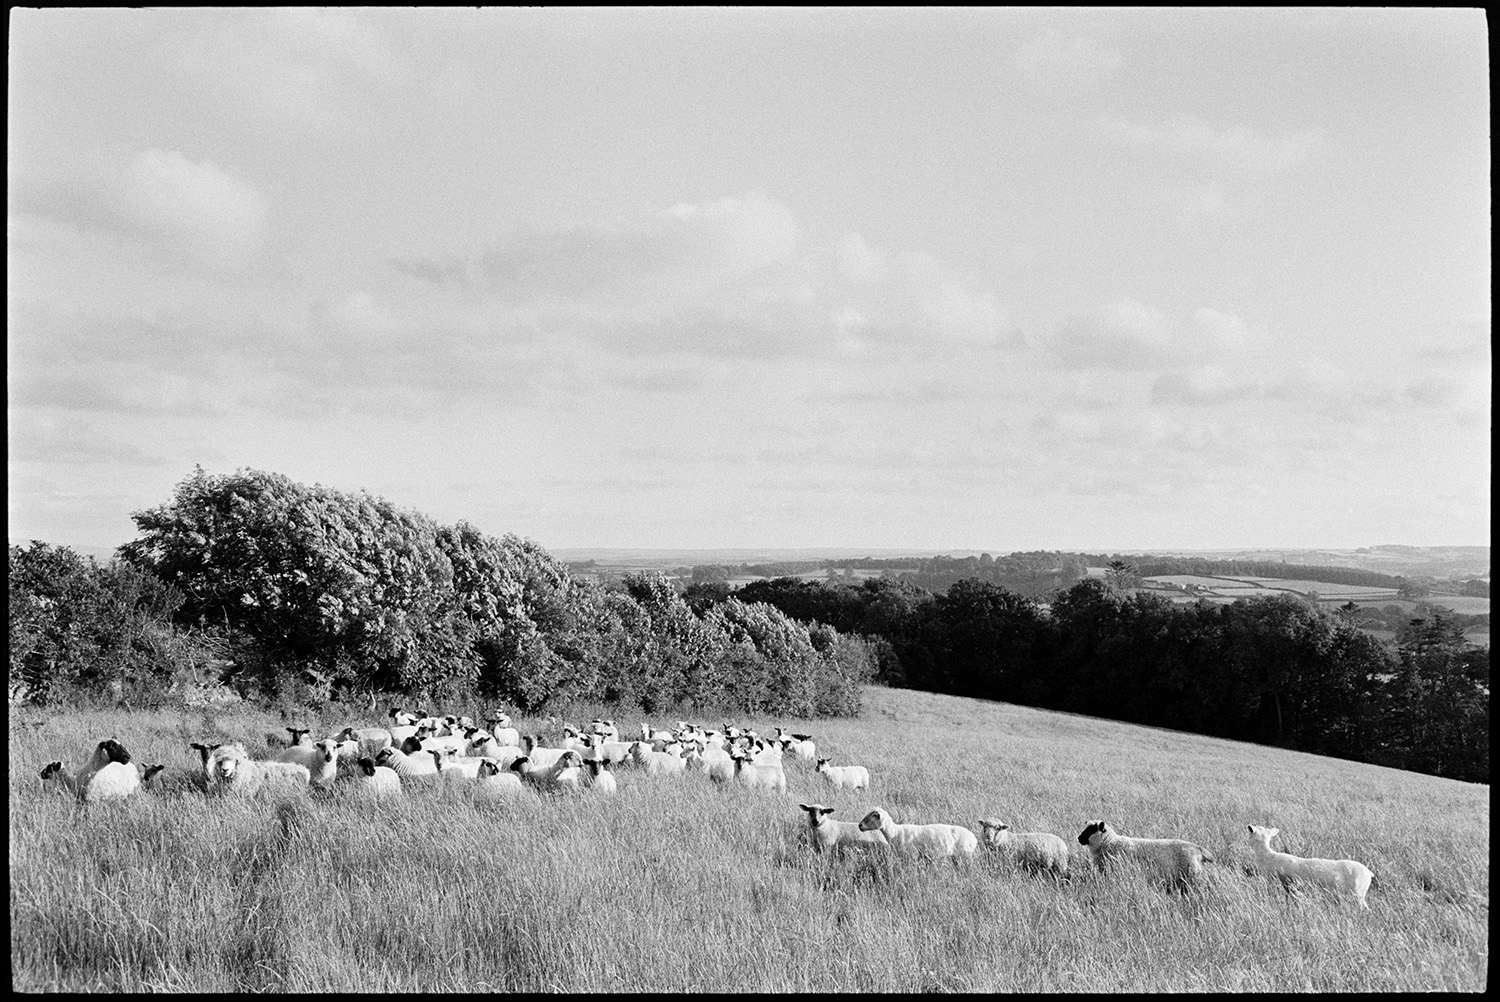 Sheep and cows in landscape.
[A flock of sheep grazing in a field of long grass, at Hatherleigh Moor. A hedgerow and view of the surrounding countryside is visible in the background.]